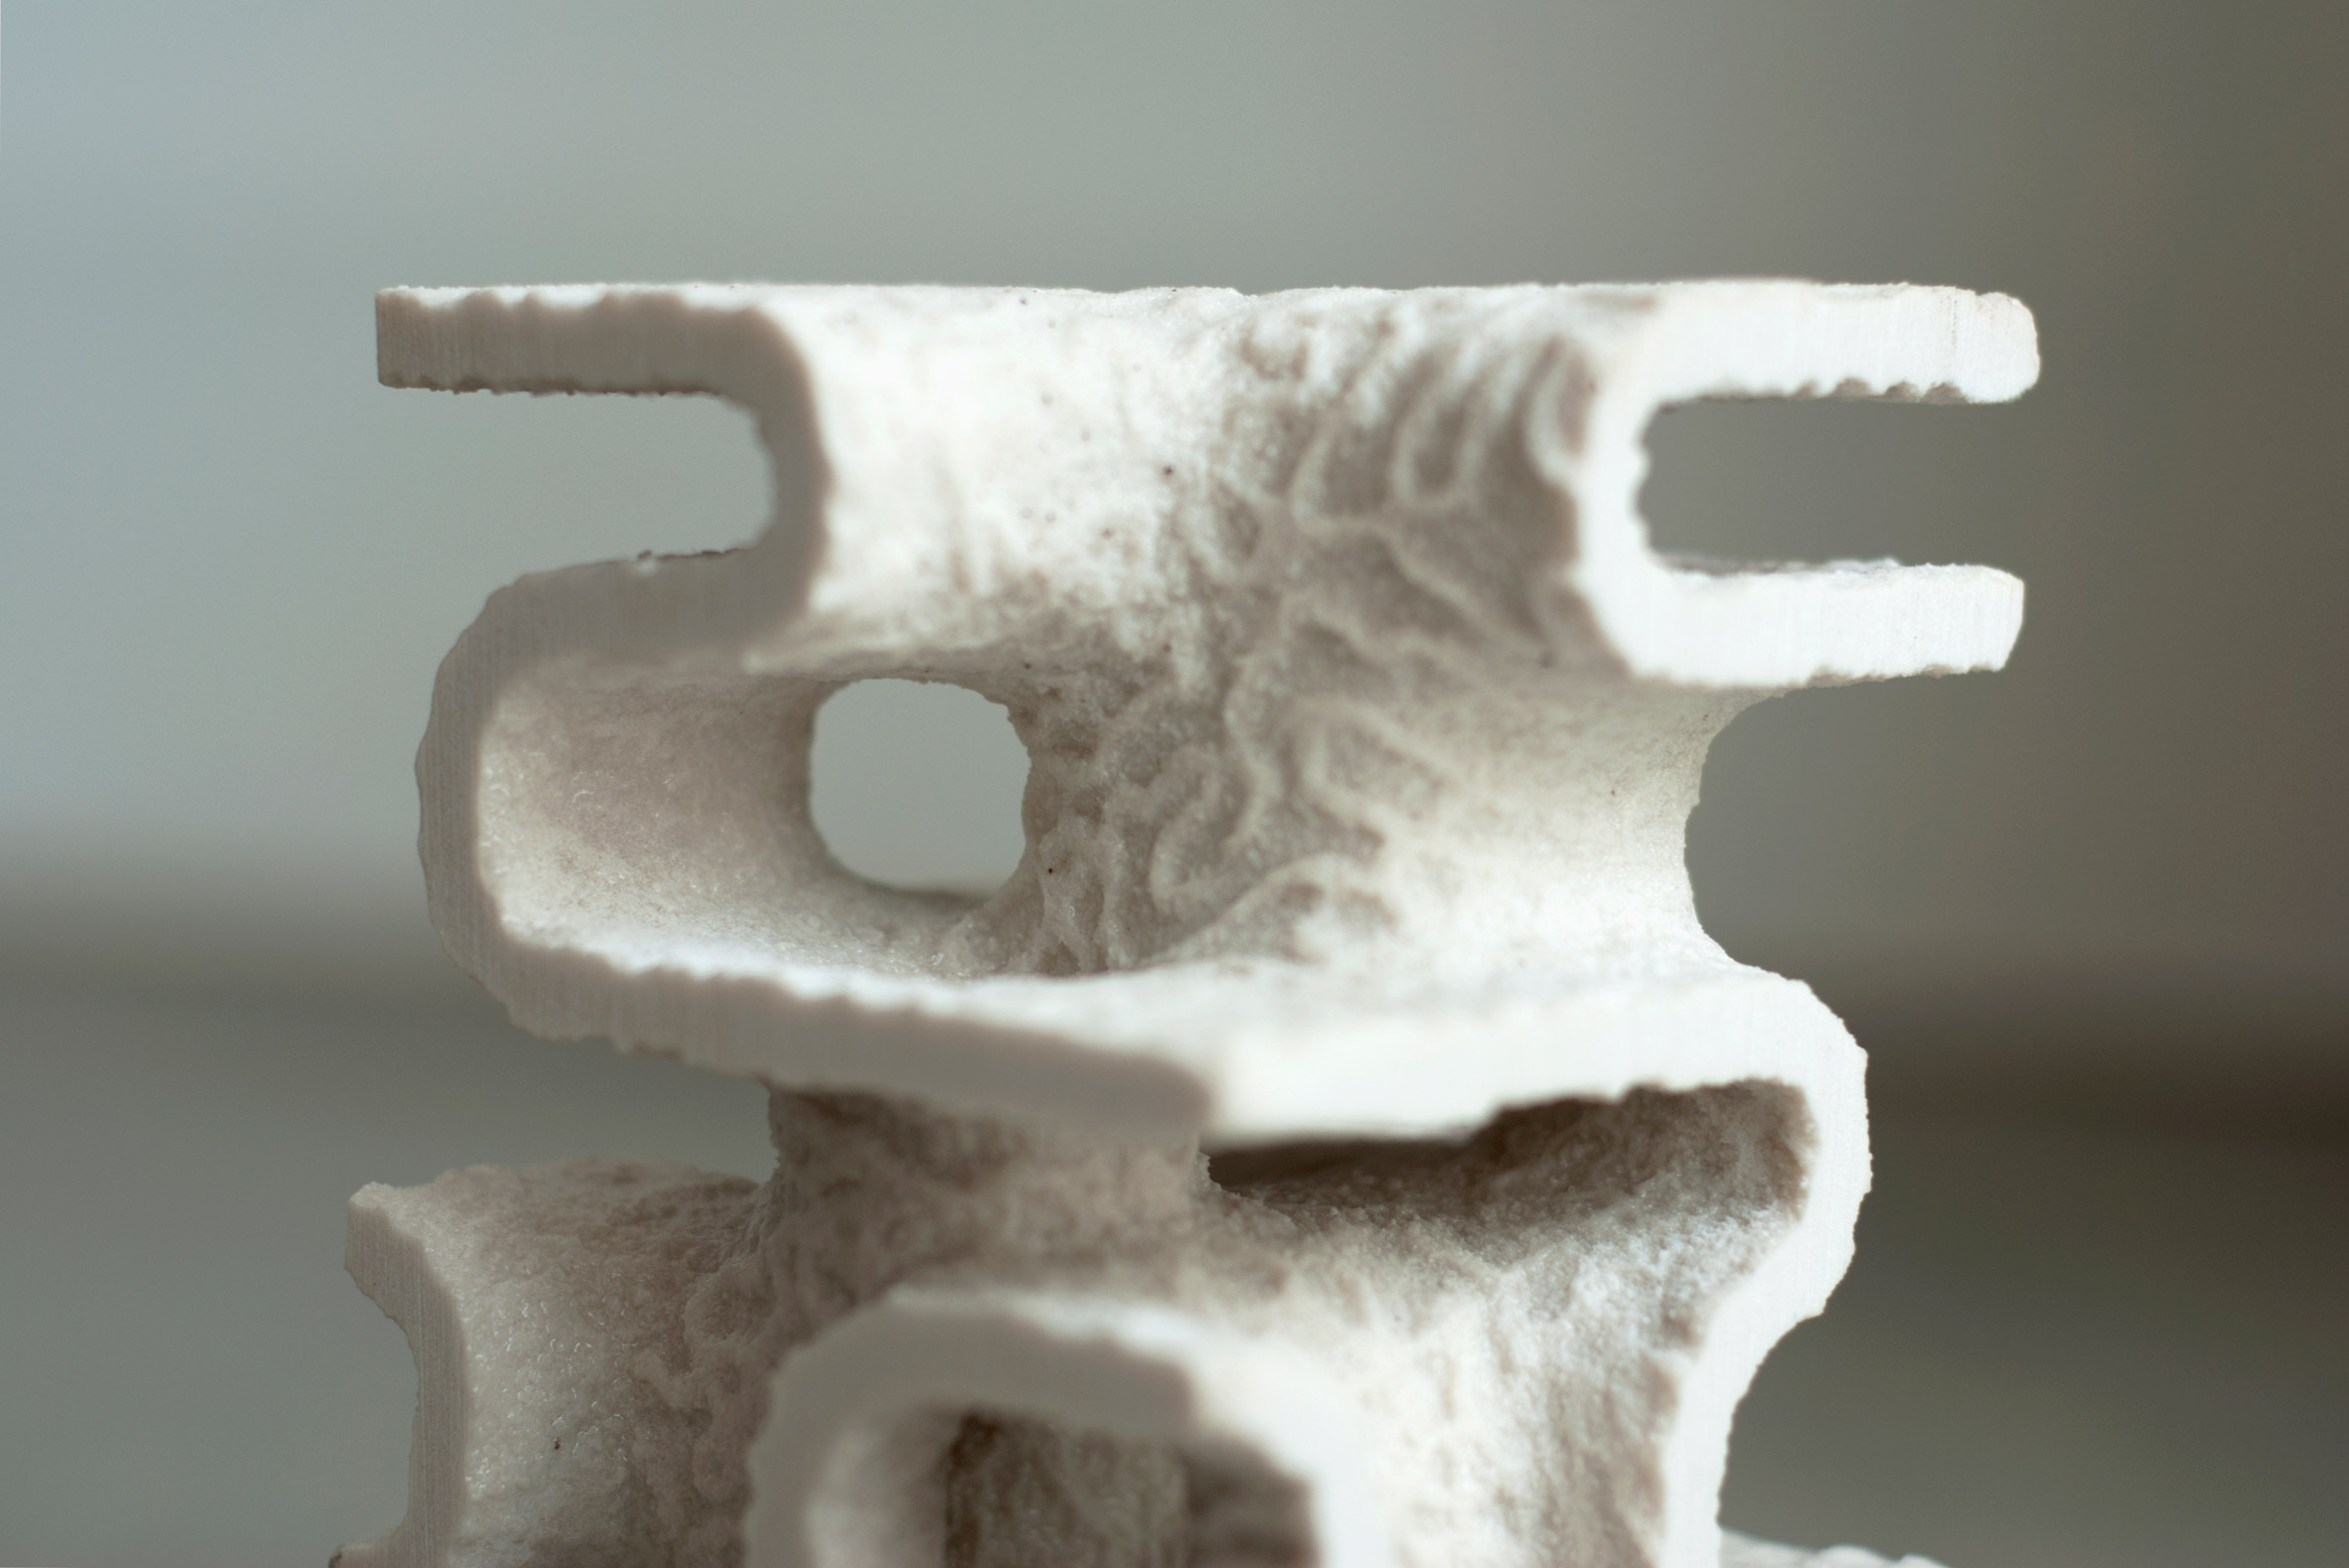 3D-Printed Corals as Replacement for Natural Coral Reef Systems